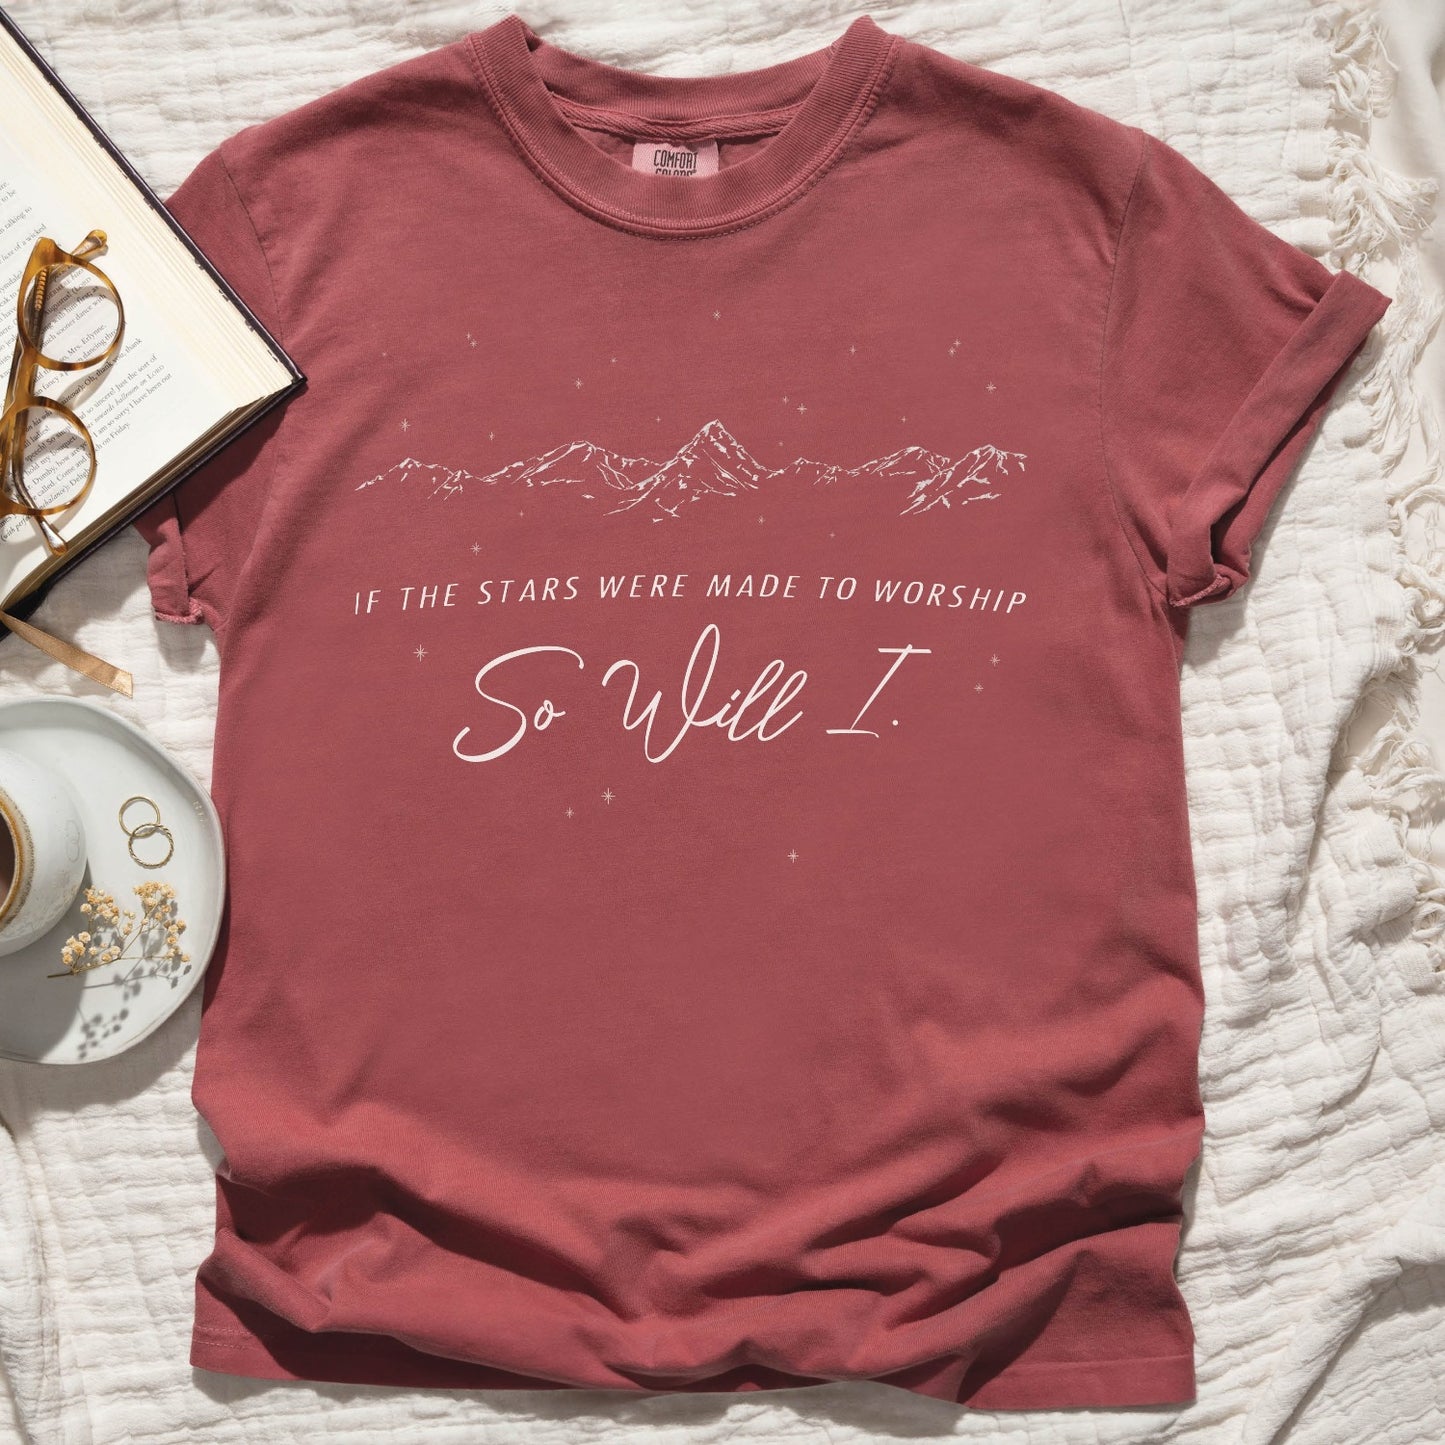 Crimson dusty mauve color garment-dyed unisex Comfort Colors 1717 t-shirt with a white hand-drawn mountain range and starry sky that says this faith-based bible verse quote, "If the Stars Were Made to Worship So Will I", created for Christian men and women Kingdom believers